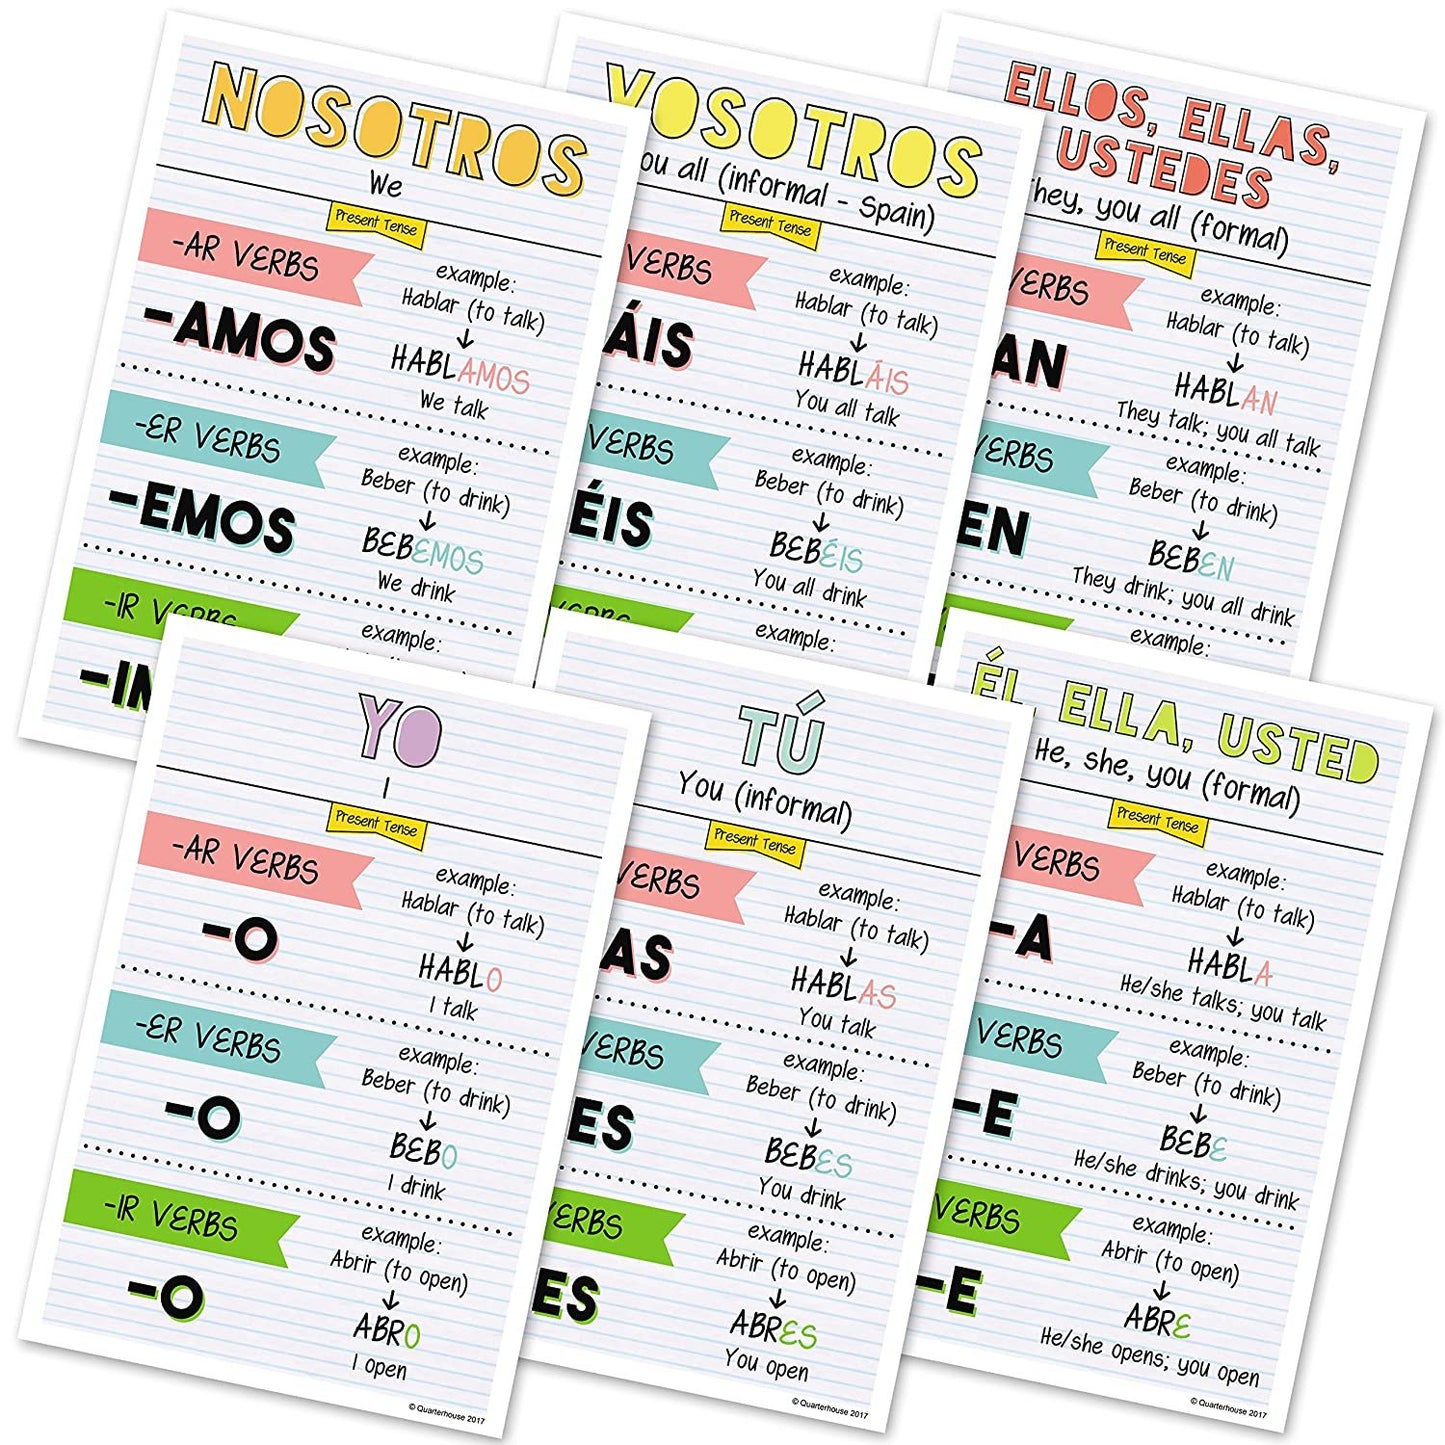 Quarterhouse Spanish Present-Tense Verb Conjugation (Light-Themed) Poster Set, Spanish Classroom Learning Materials for K-12 Students and Teachers, Set of 6, 12 x 18 Inches, Extra Durable